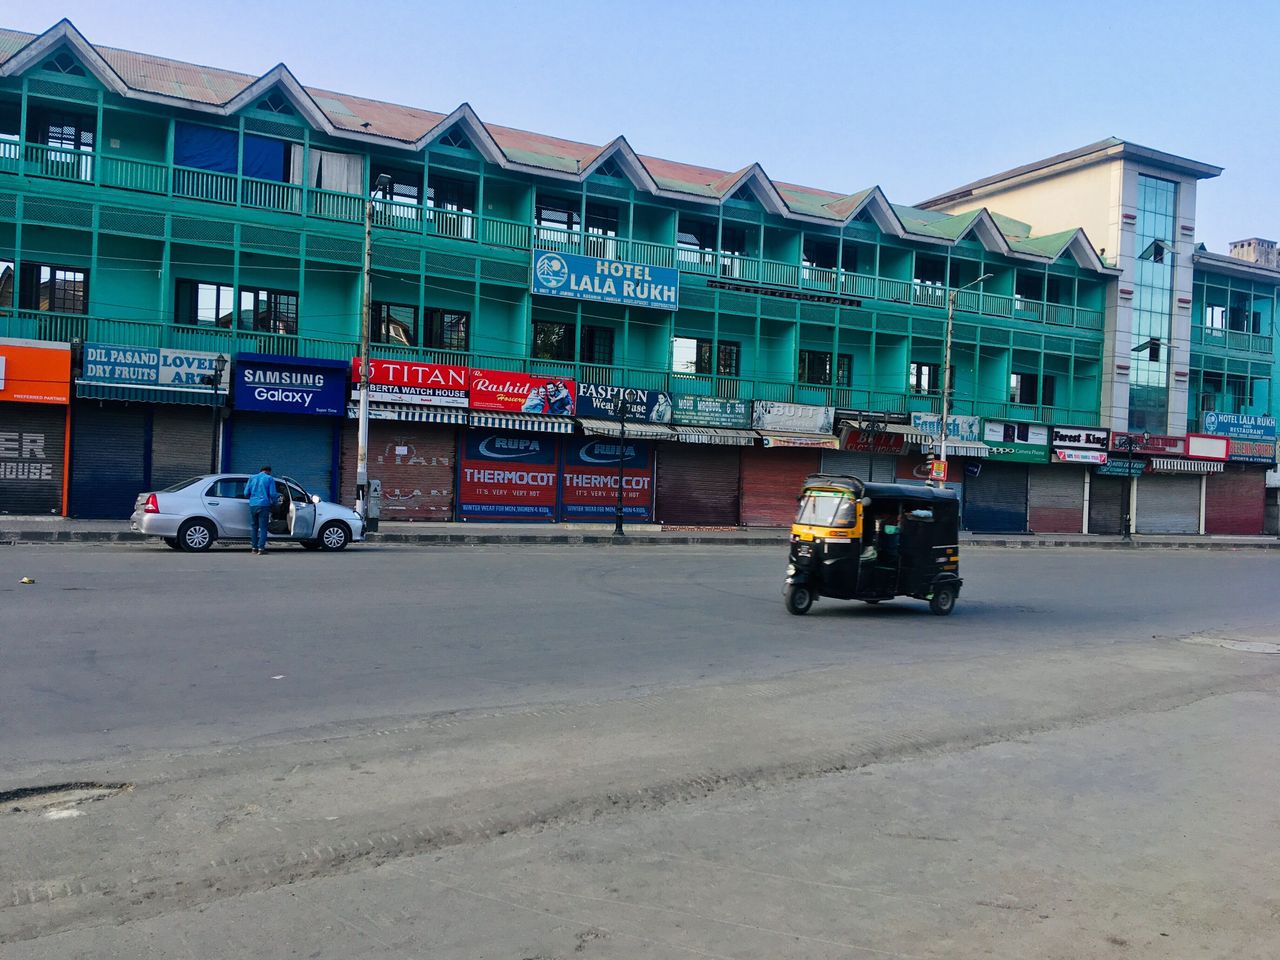 Lal Chowk, the main market in Srinagar, the summer capital of Jammu and Kashmir, was empty on the afternoon of Sept. 17, 2019.